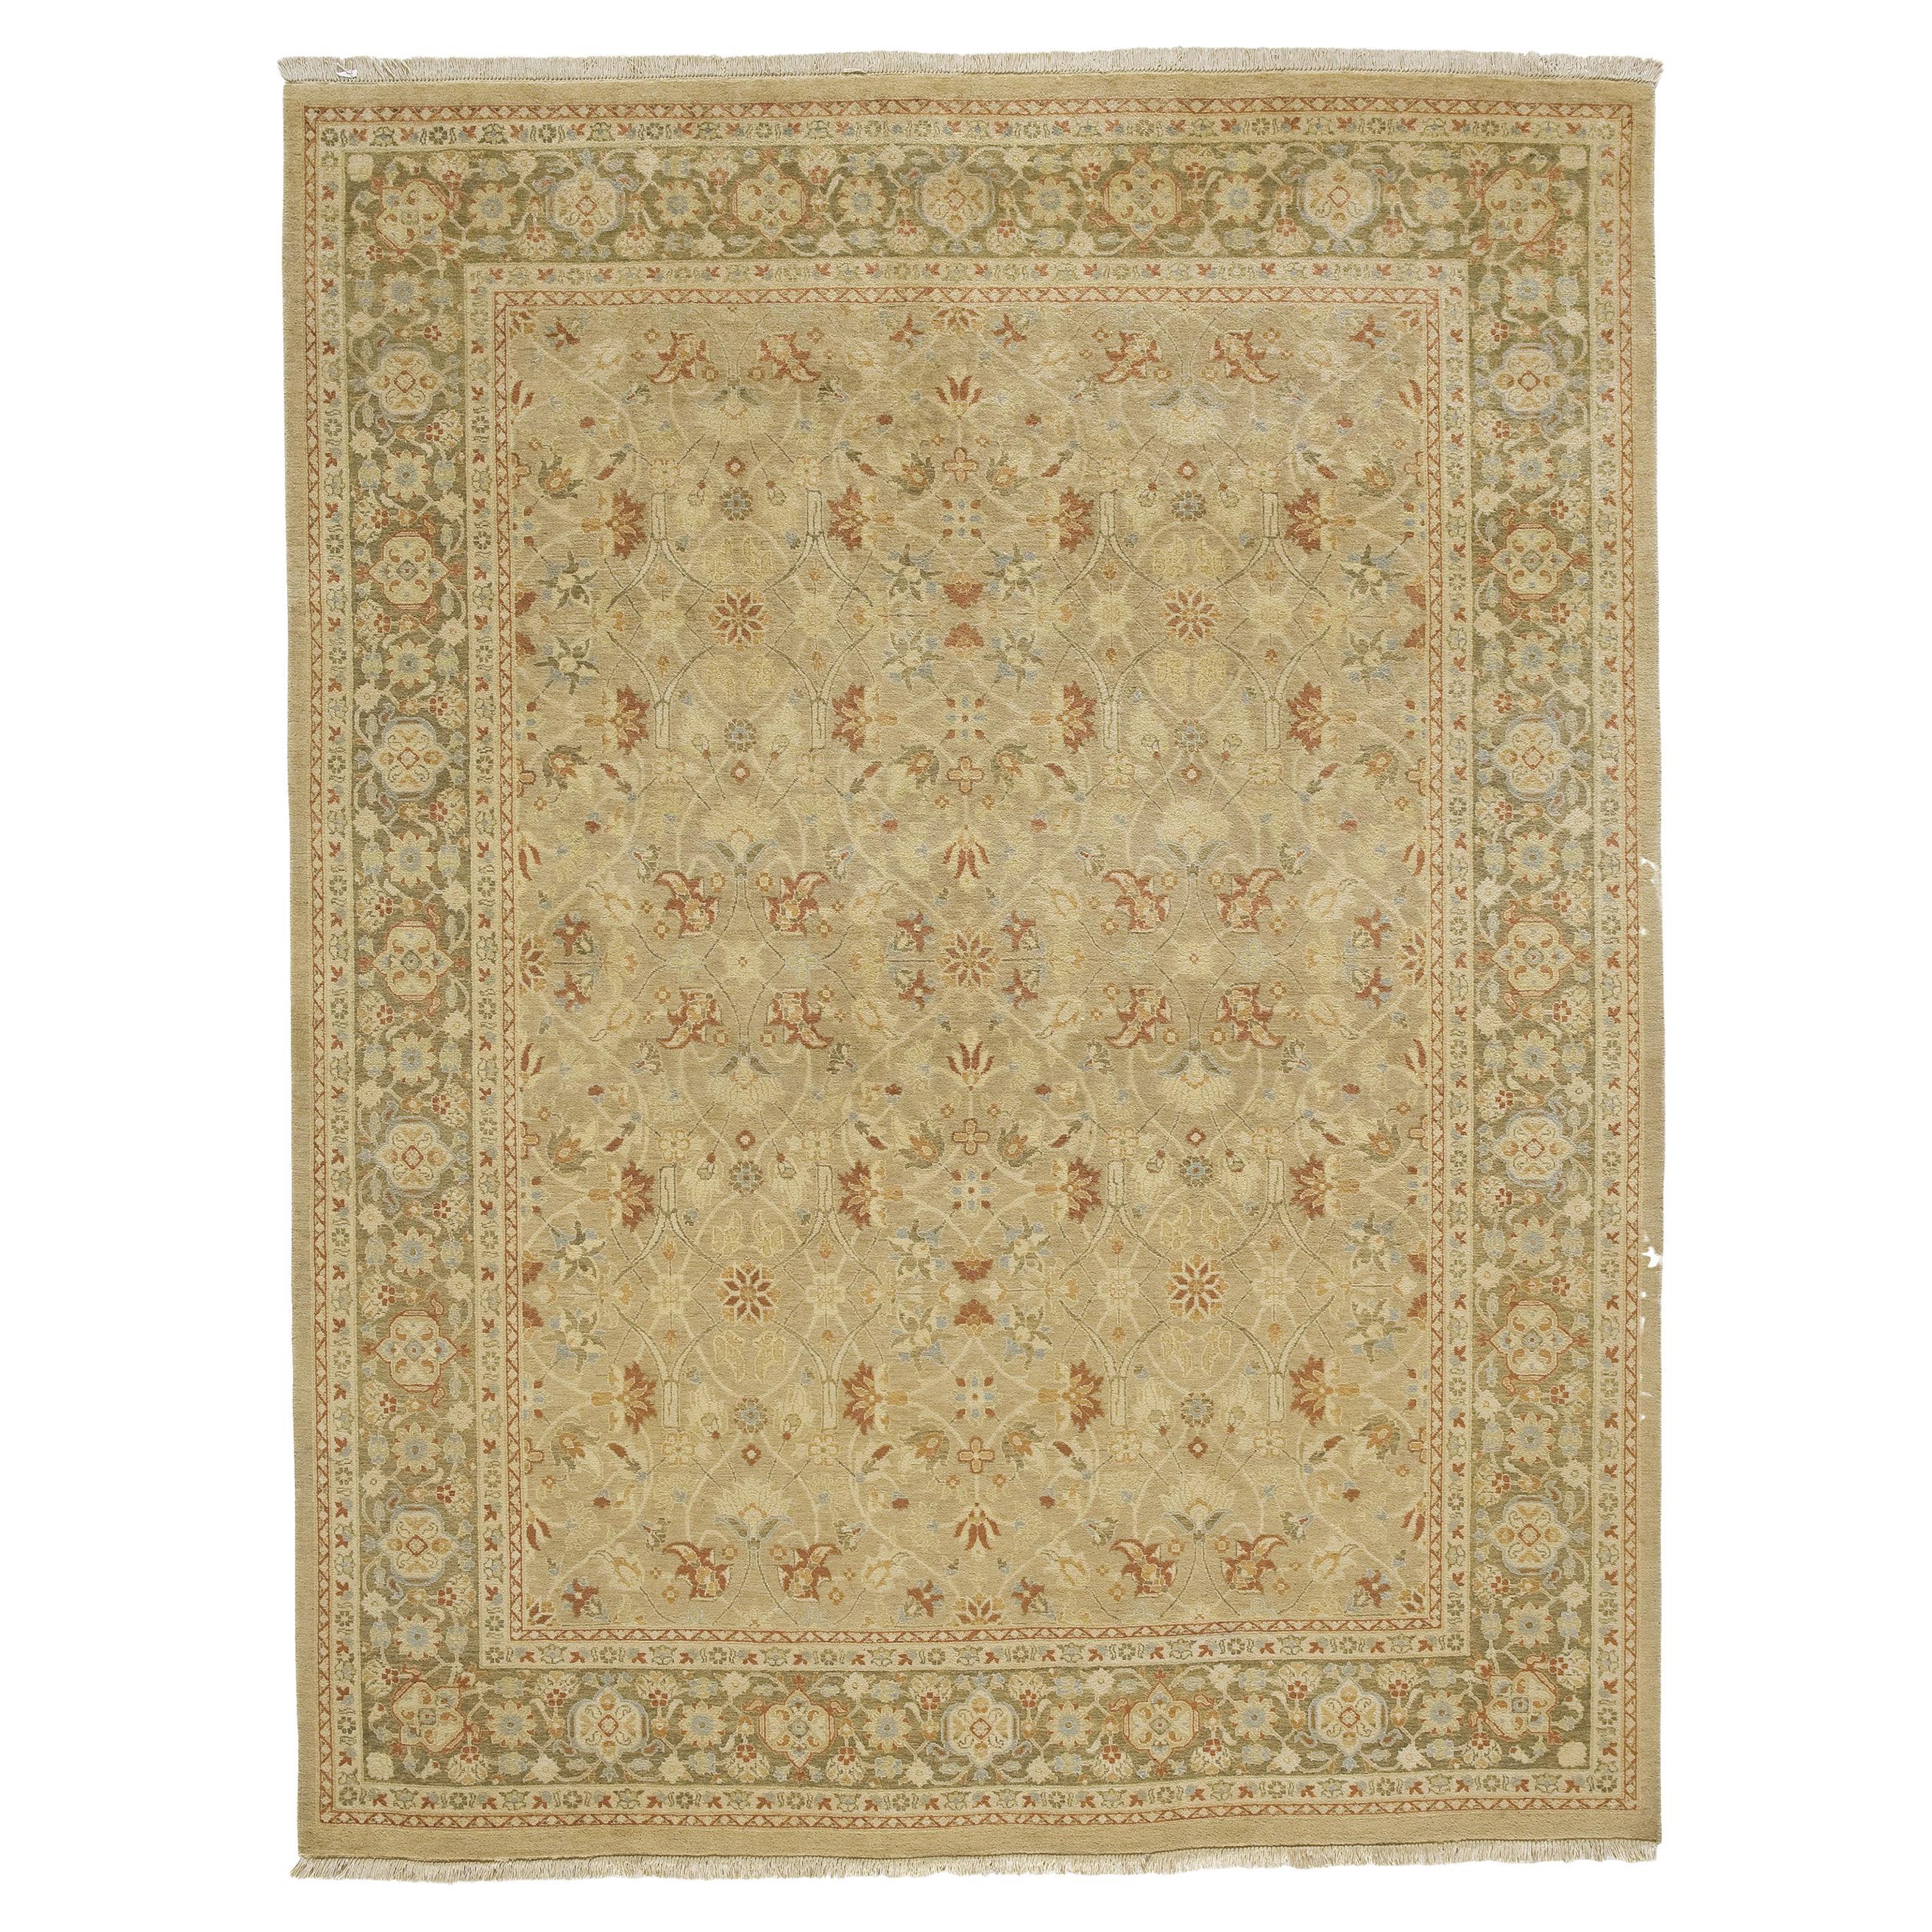 Luxury Traditional Hand-Knotted Tabriz Gold/Olive 12x18 Rug